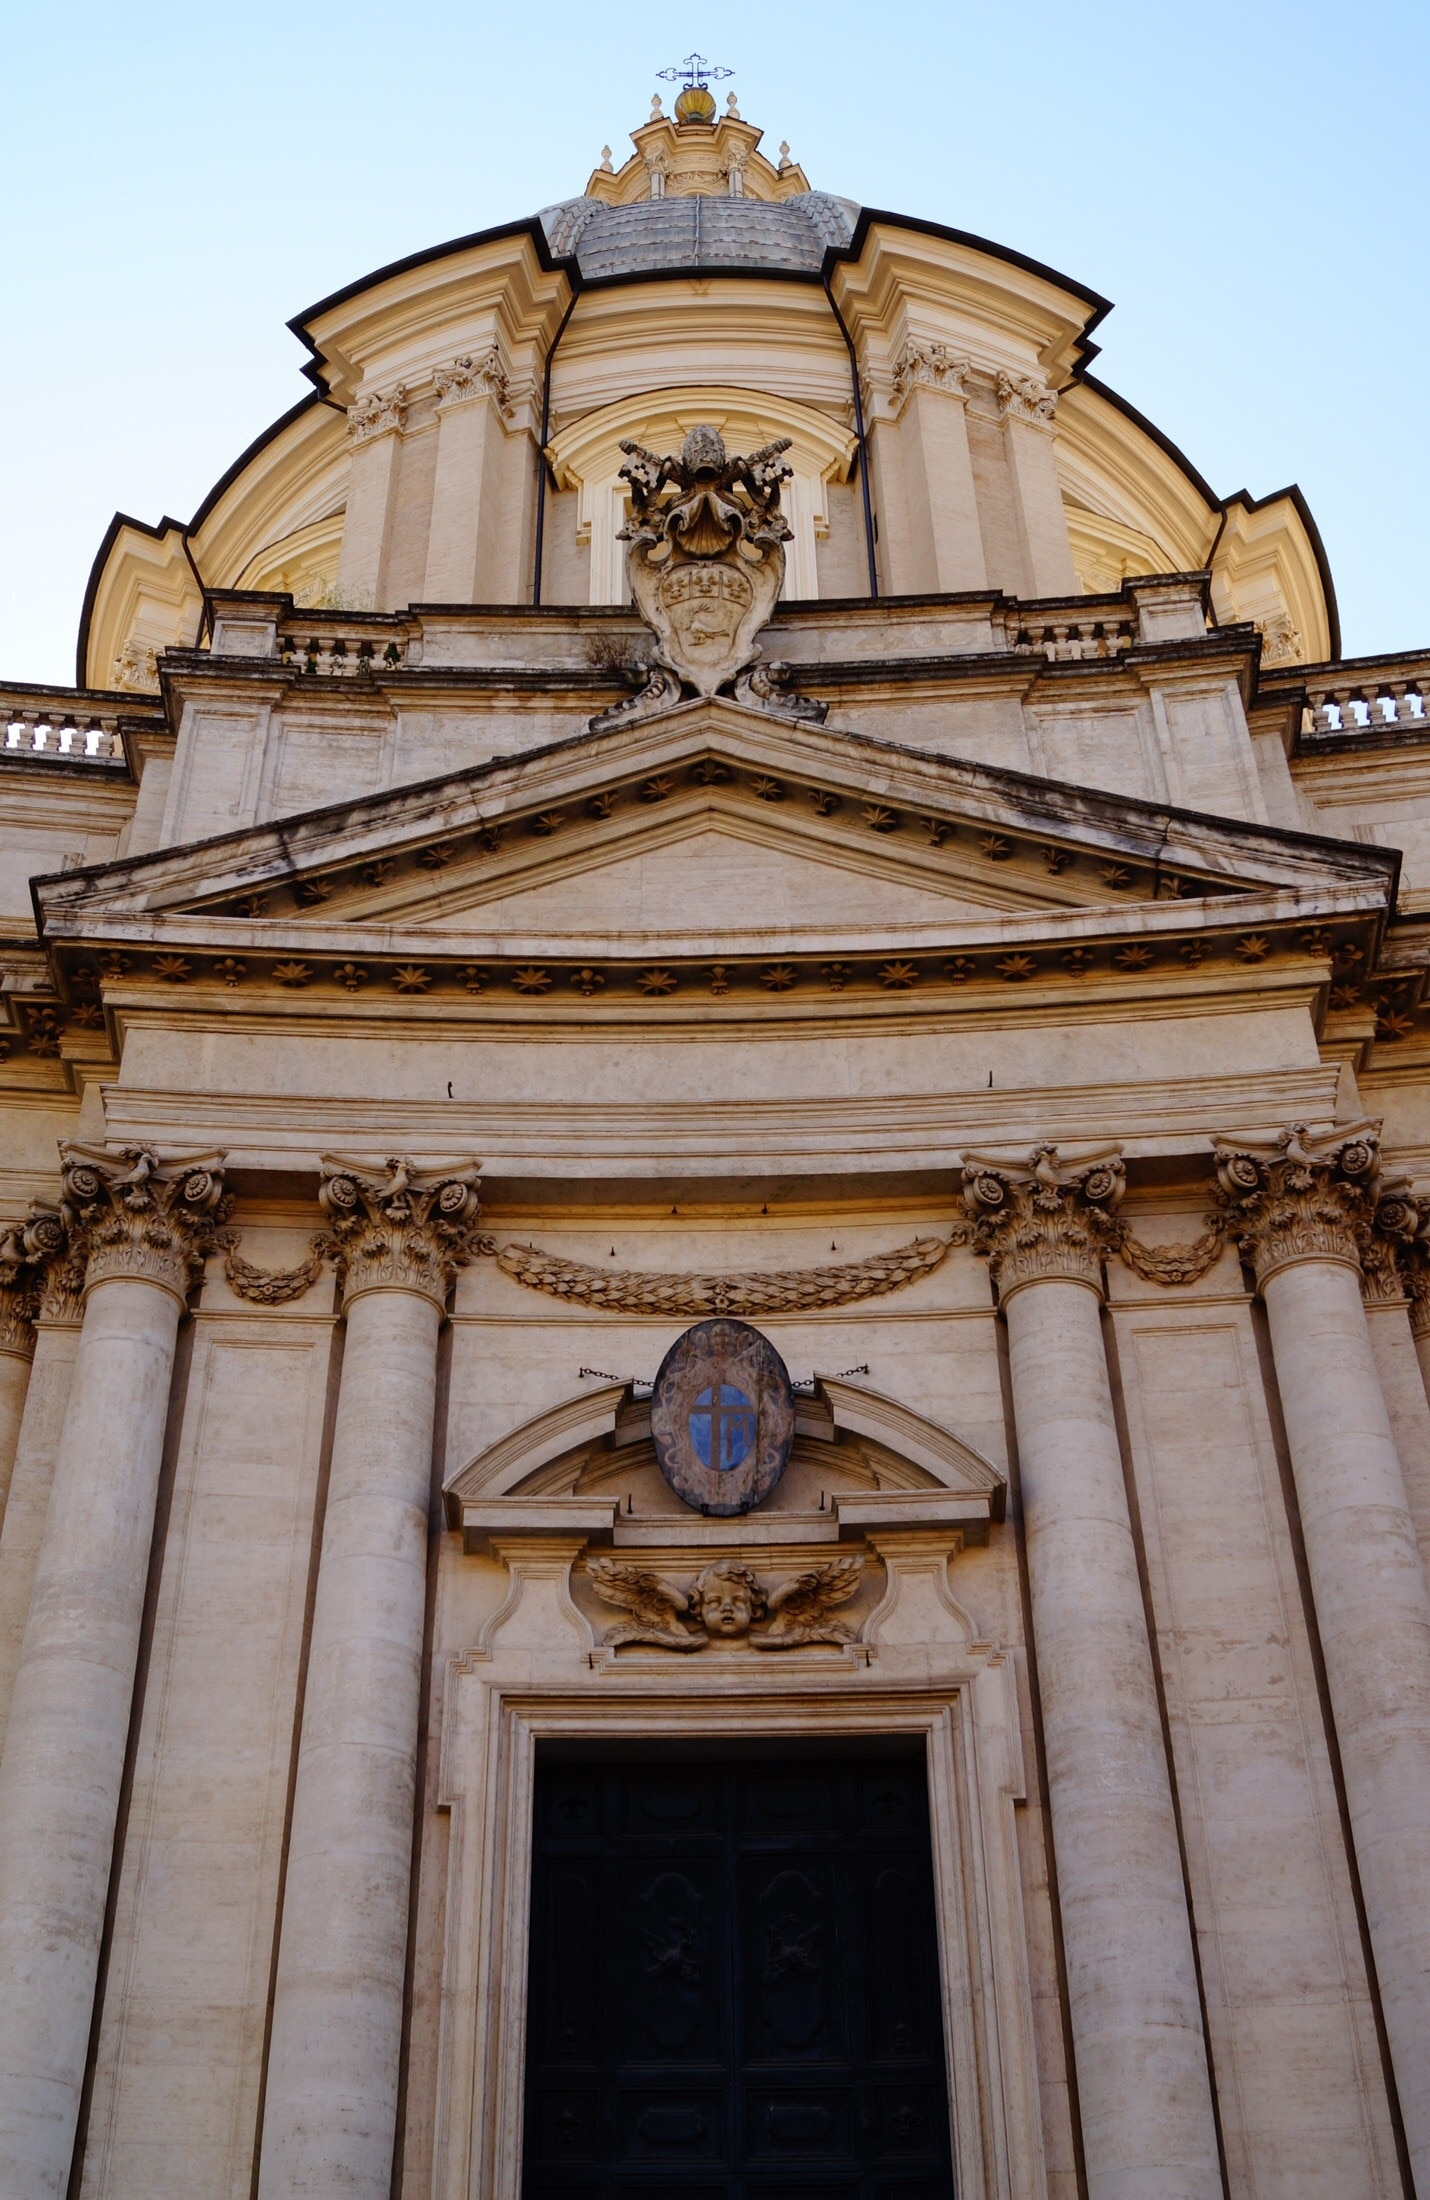 The entrance to Sant'Agnese in Agone.